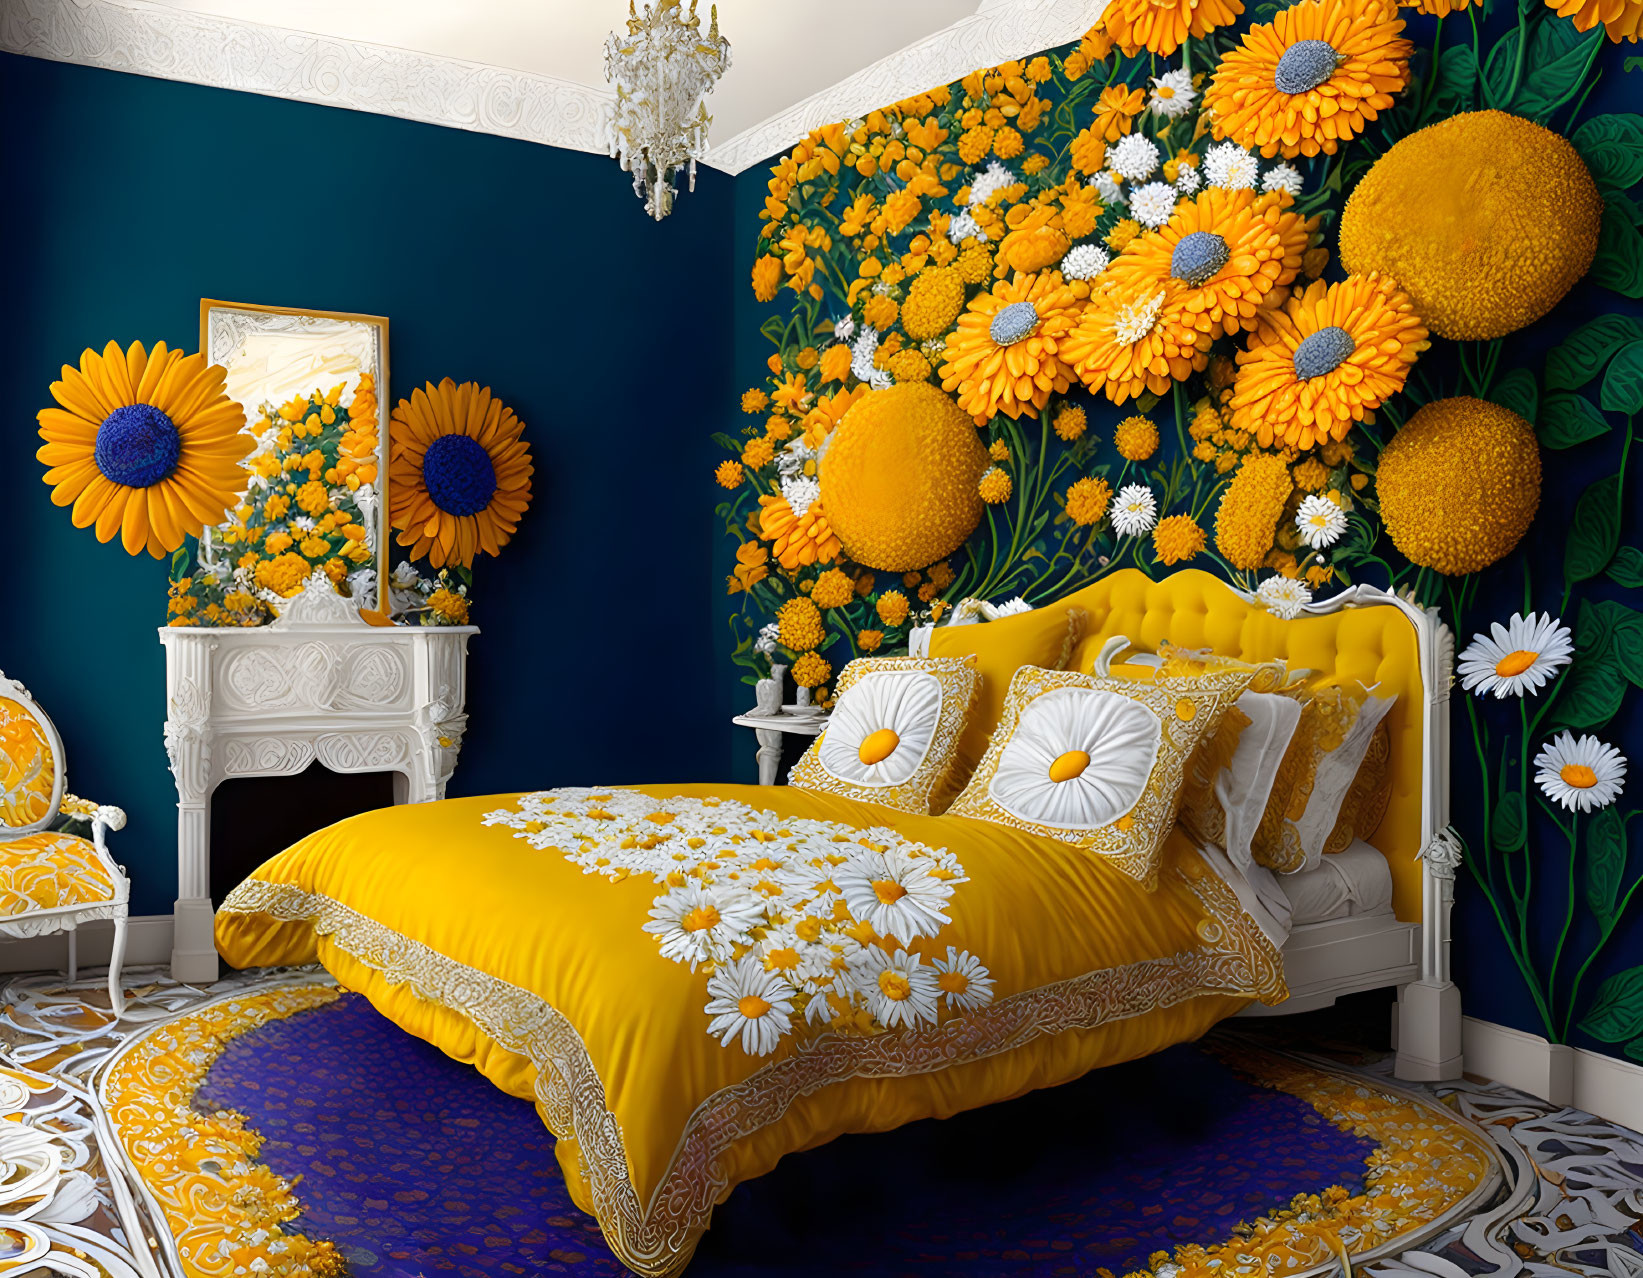 Bright sunflower-themed bedroom with yellow bedspread and floral wall mural